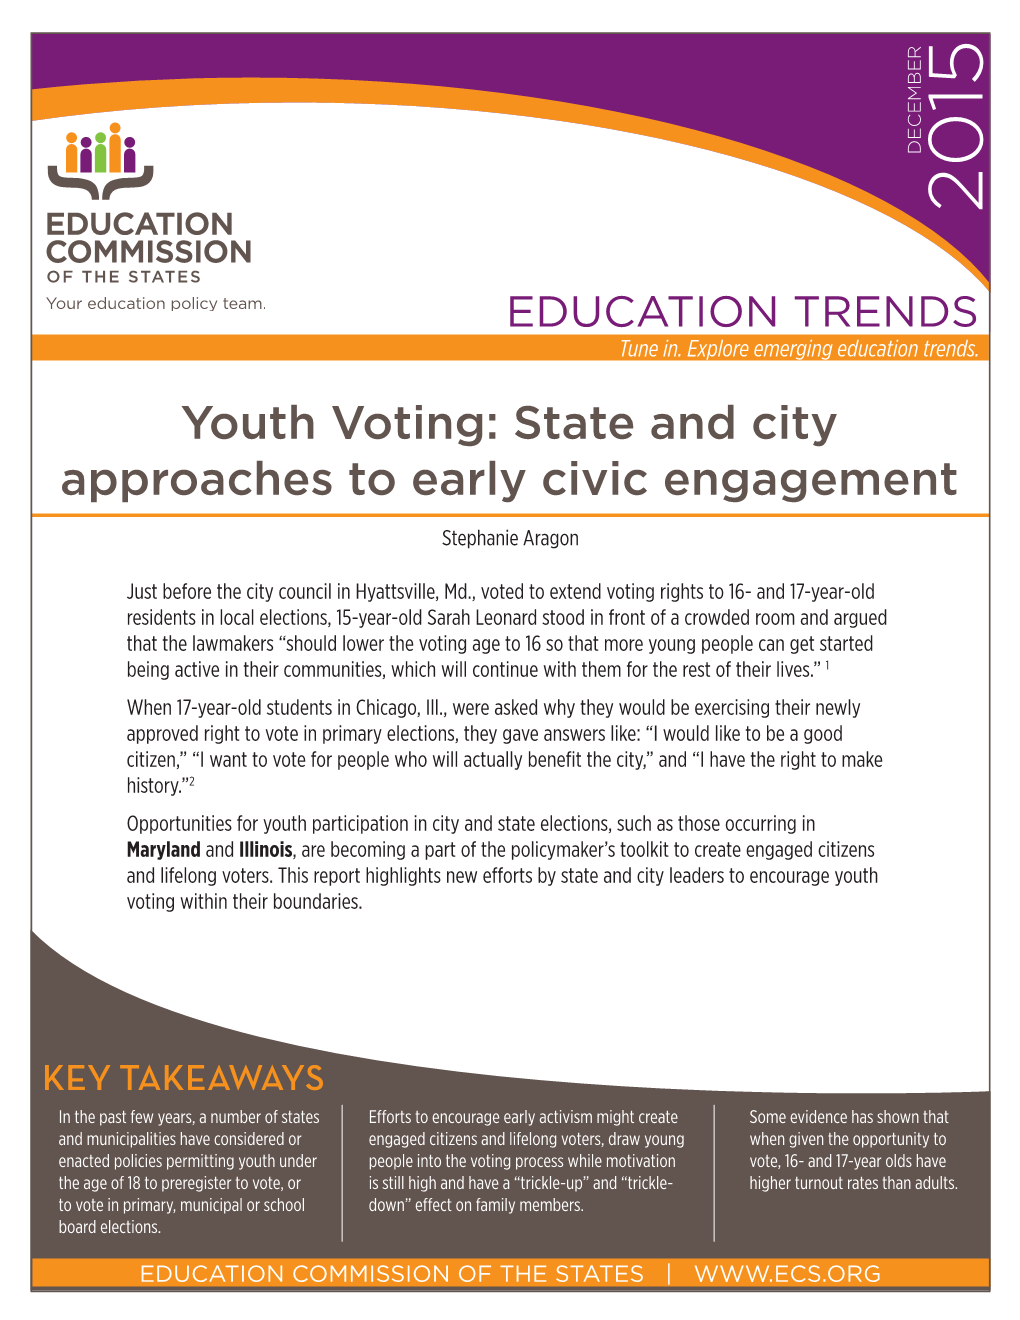 Youth Voting: State and City Approaches to Early Civic Engagement Stephanie Aragon